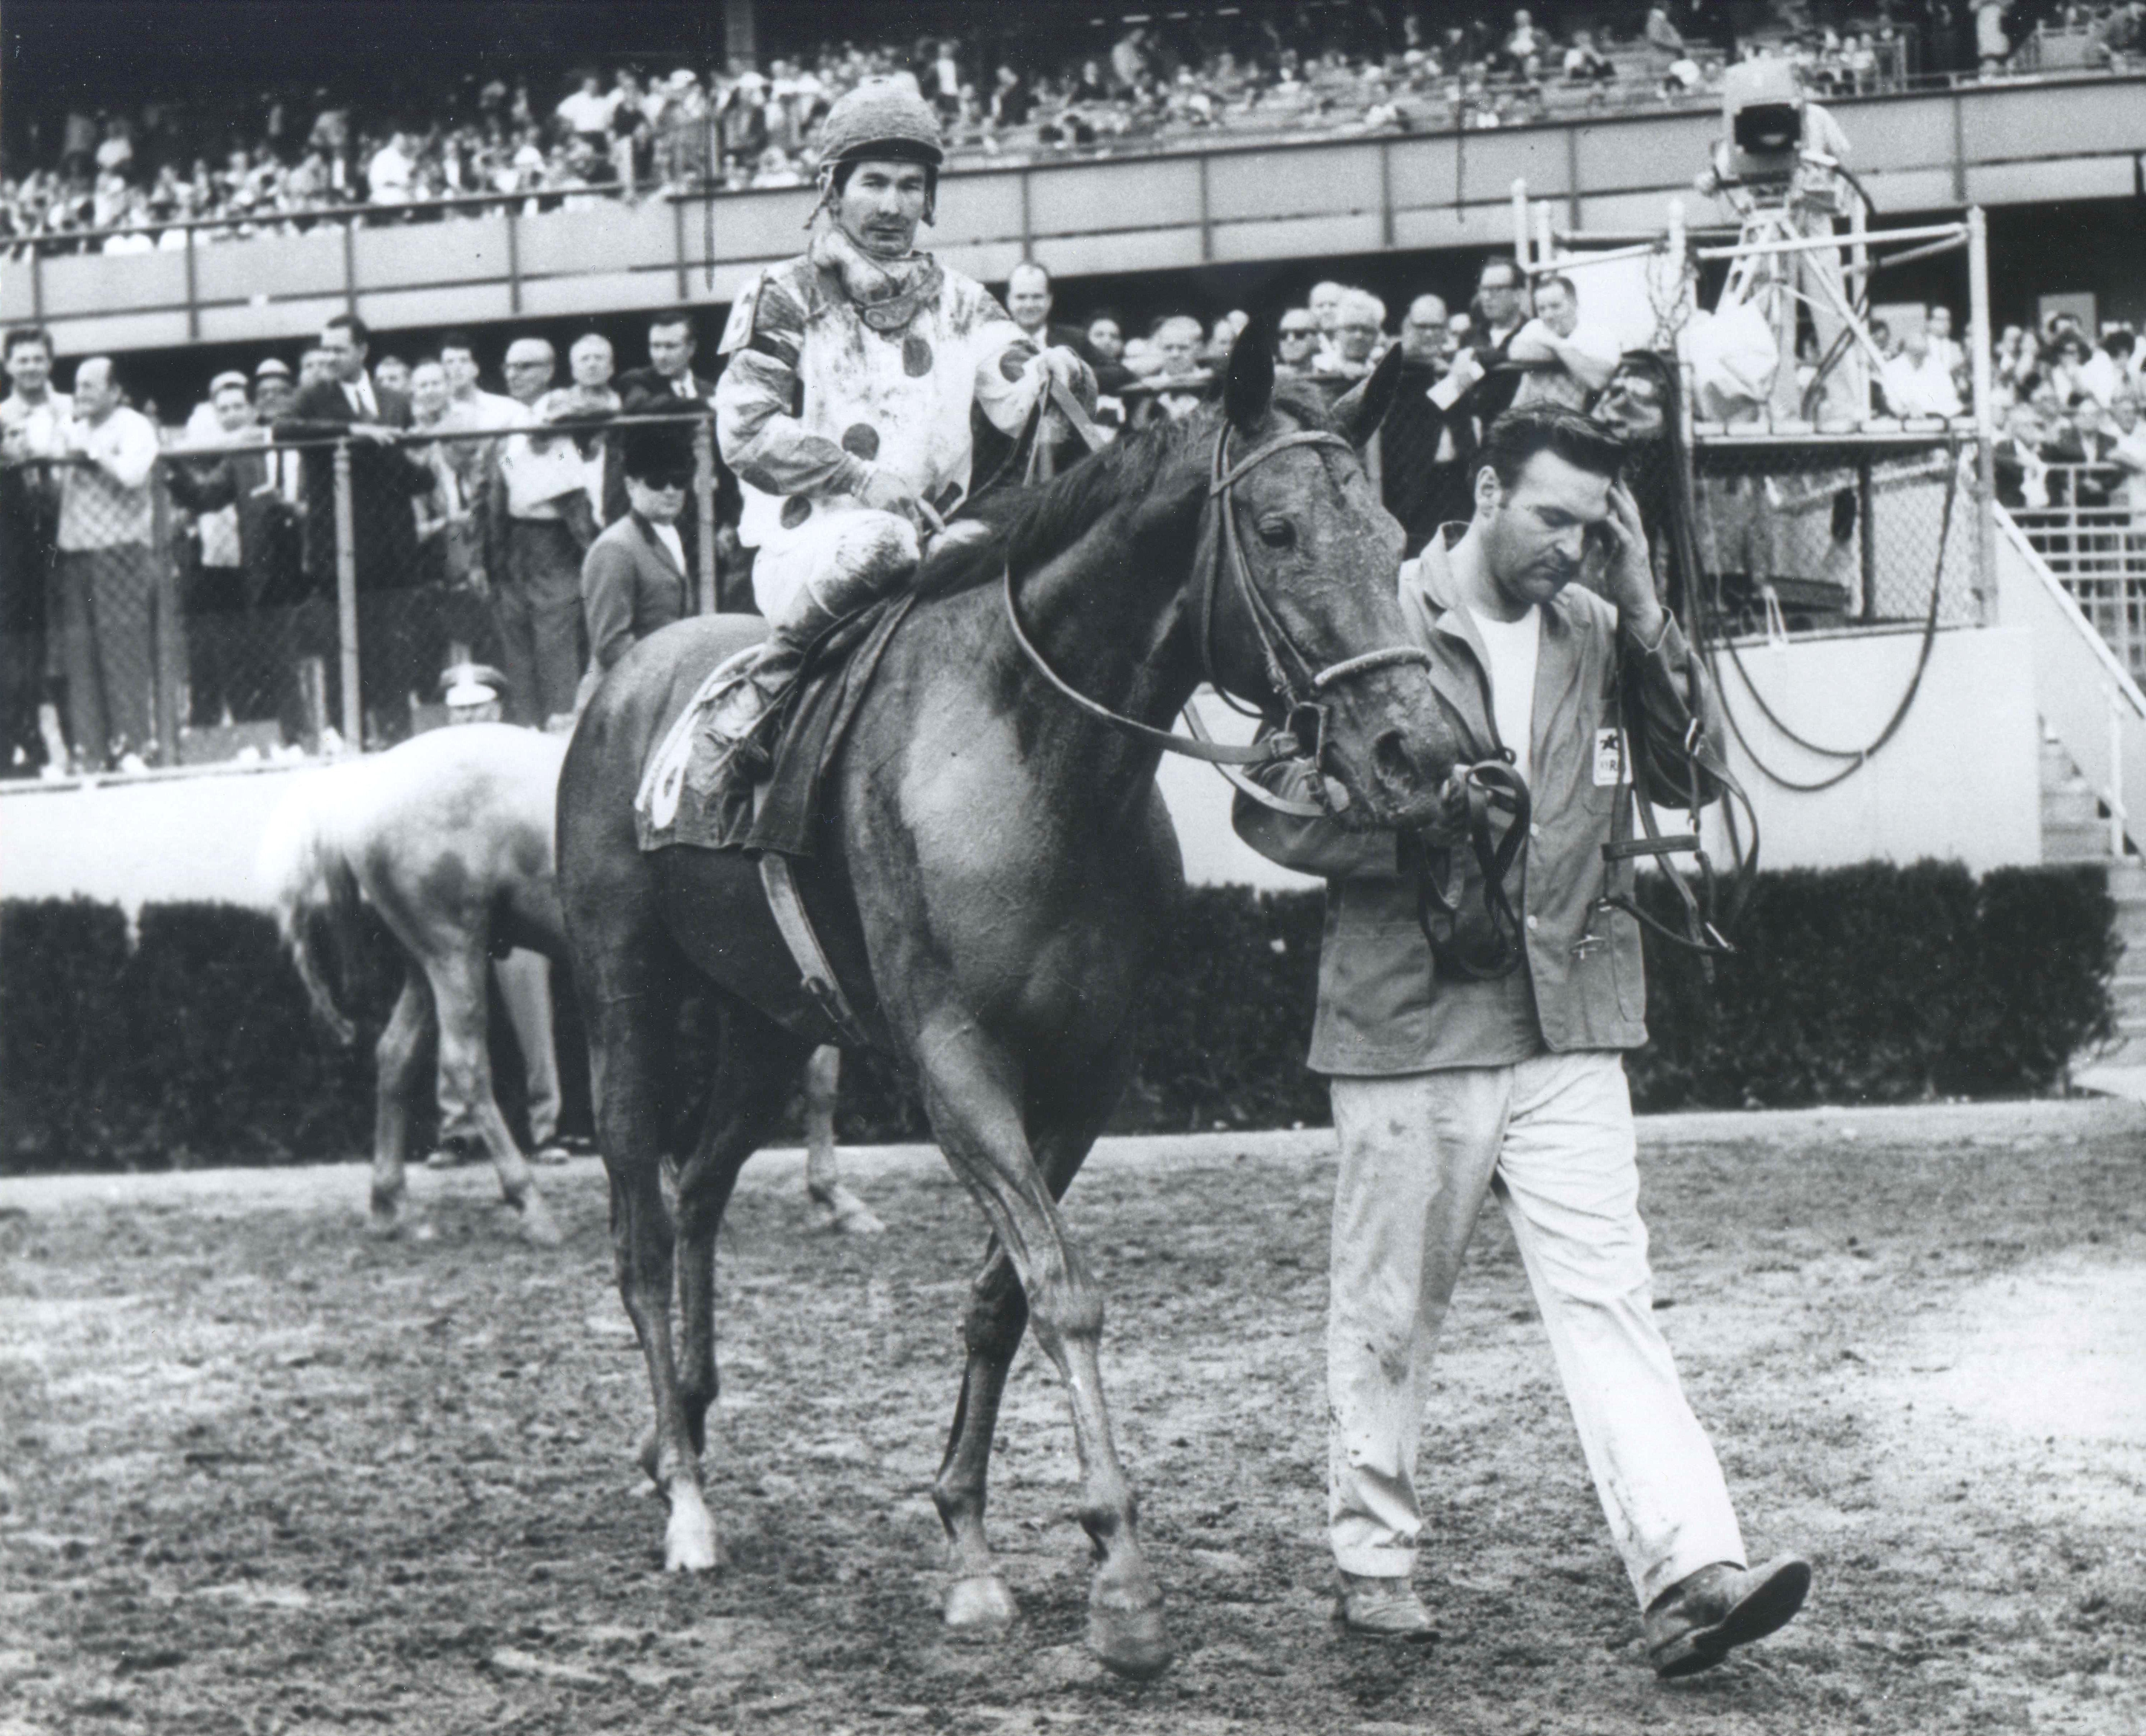 Damascus with Bill Shoemaker up (The BloodHorse)